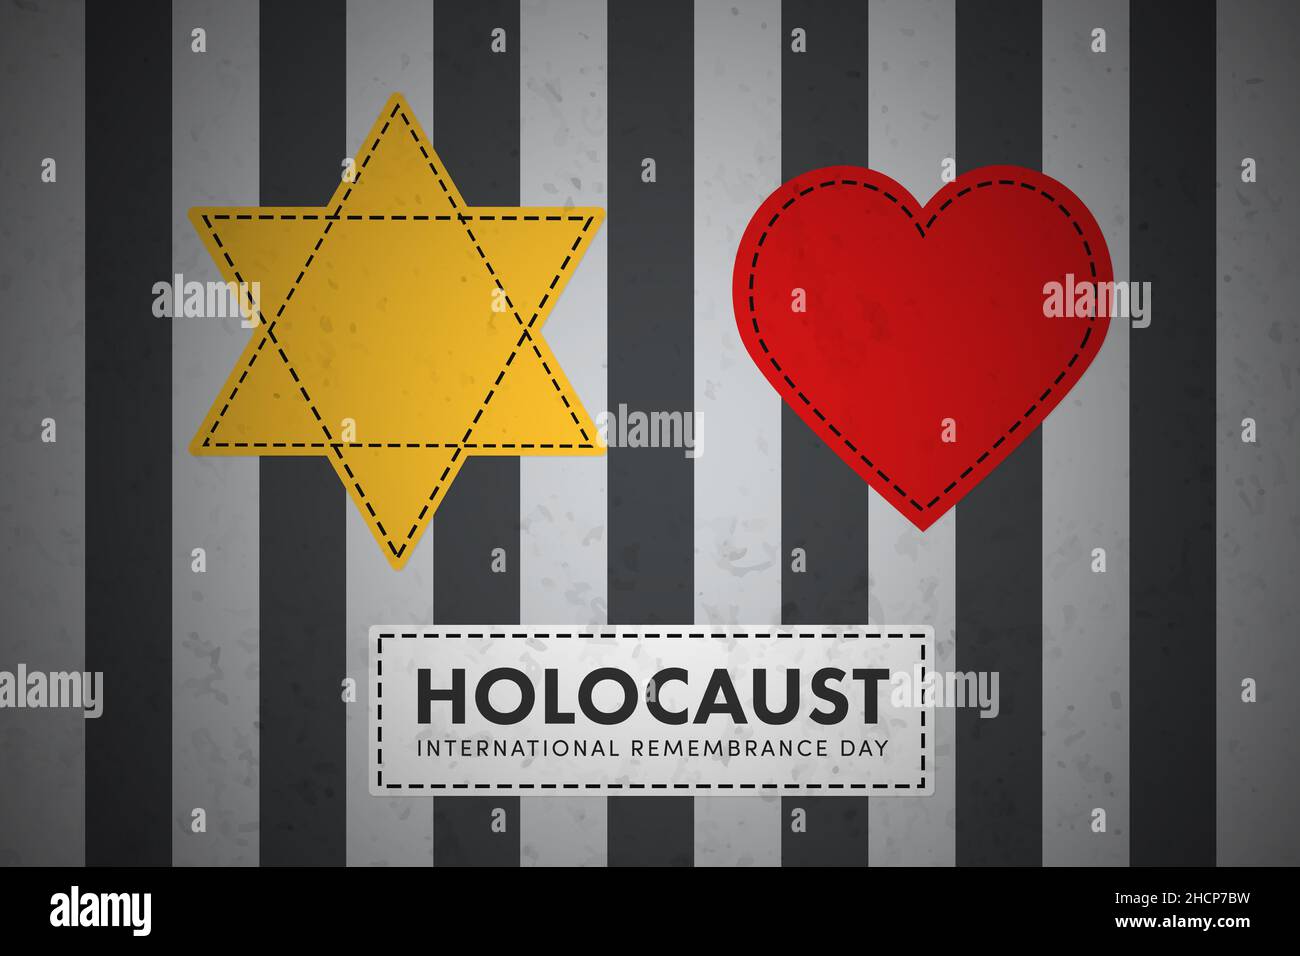 International Holocaust Remembrance Day. Jewish star, stripes on prisoner robe outfit. World War II Remembrance Day,  January 27 Stock Photo